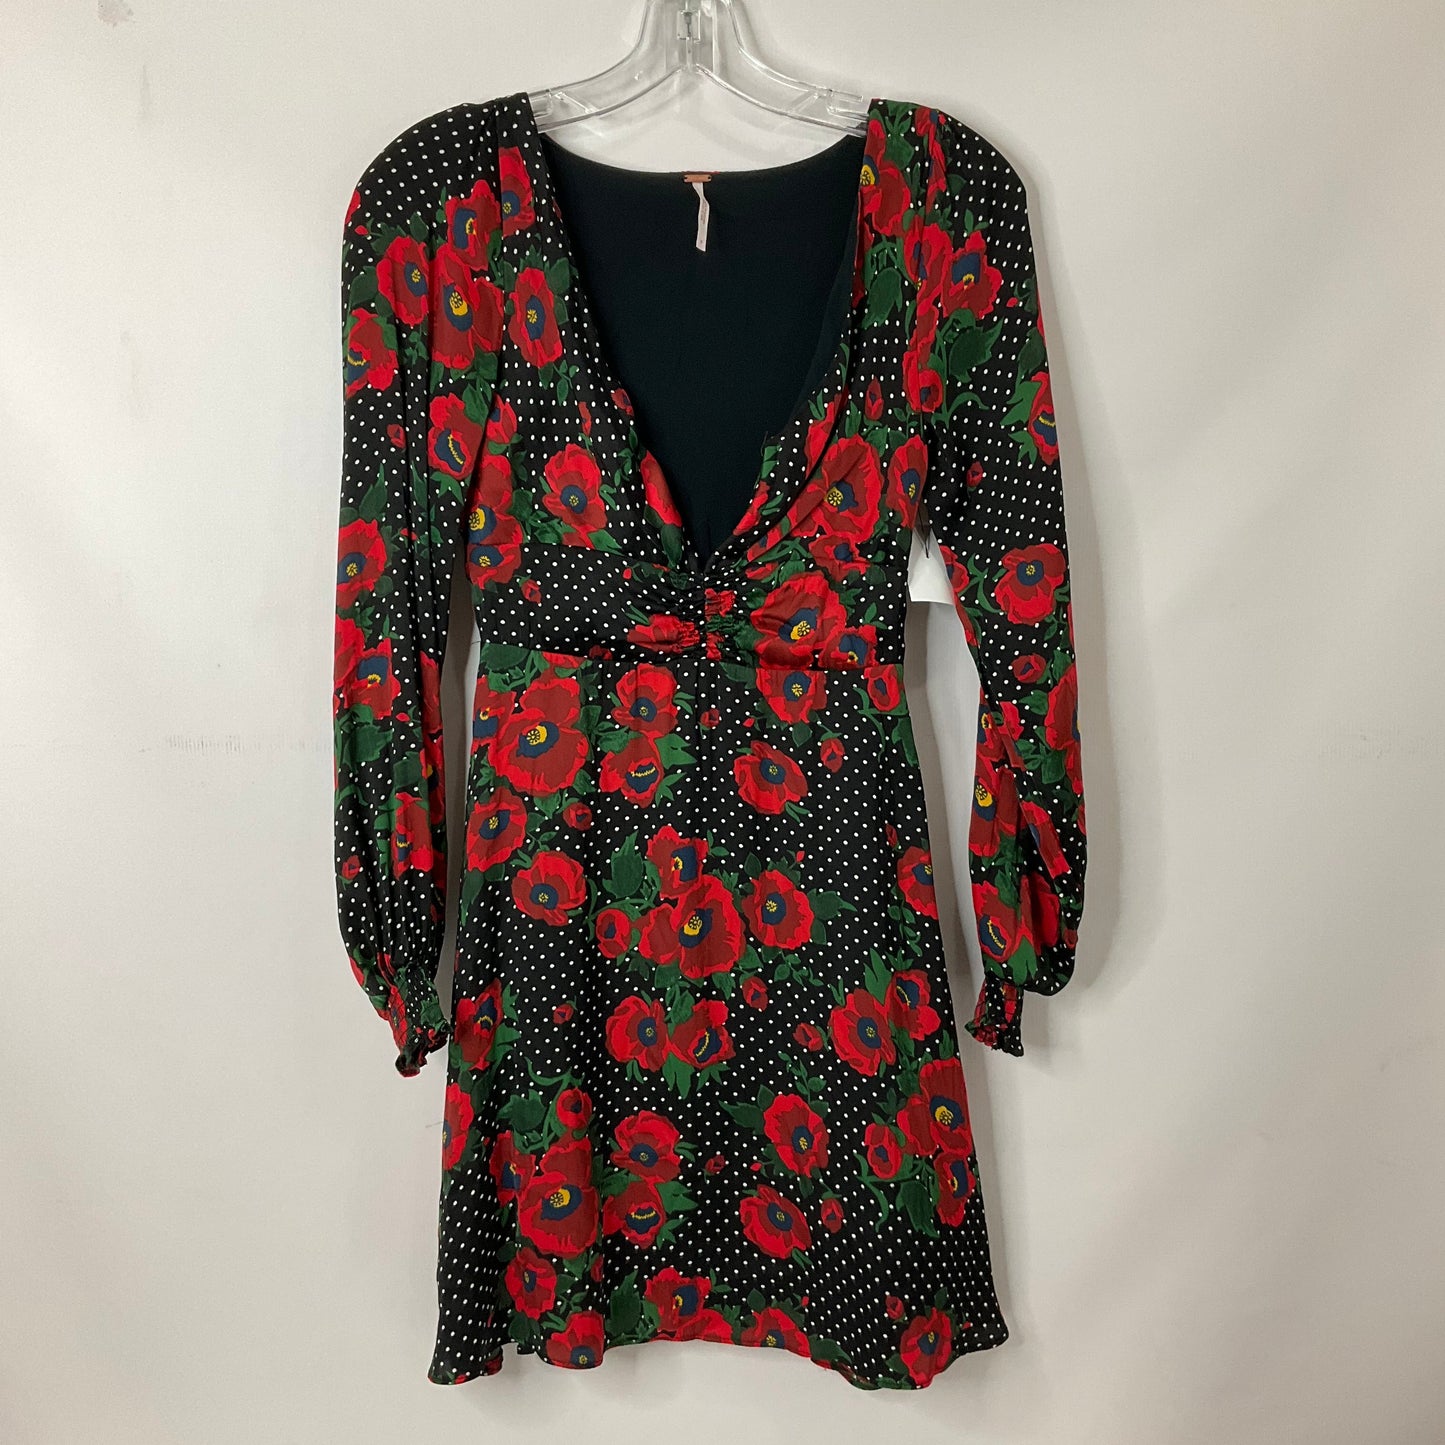 Floral Print Dress Casual Short Free People, Size 2